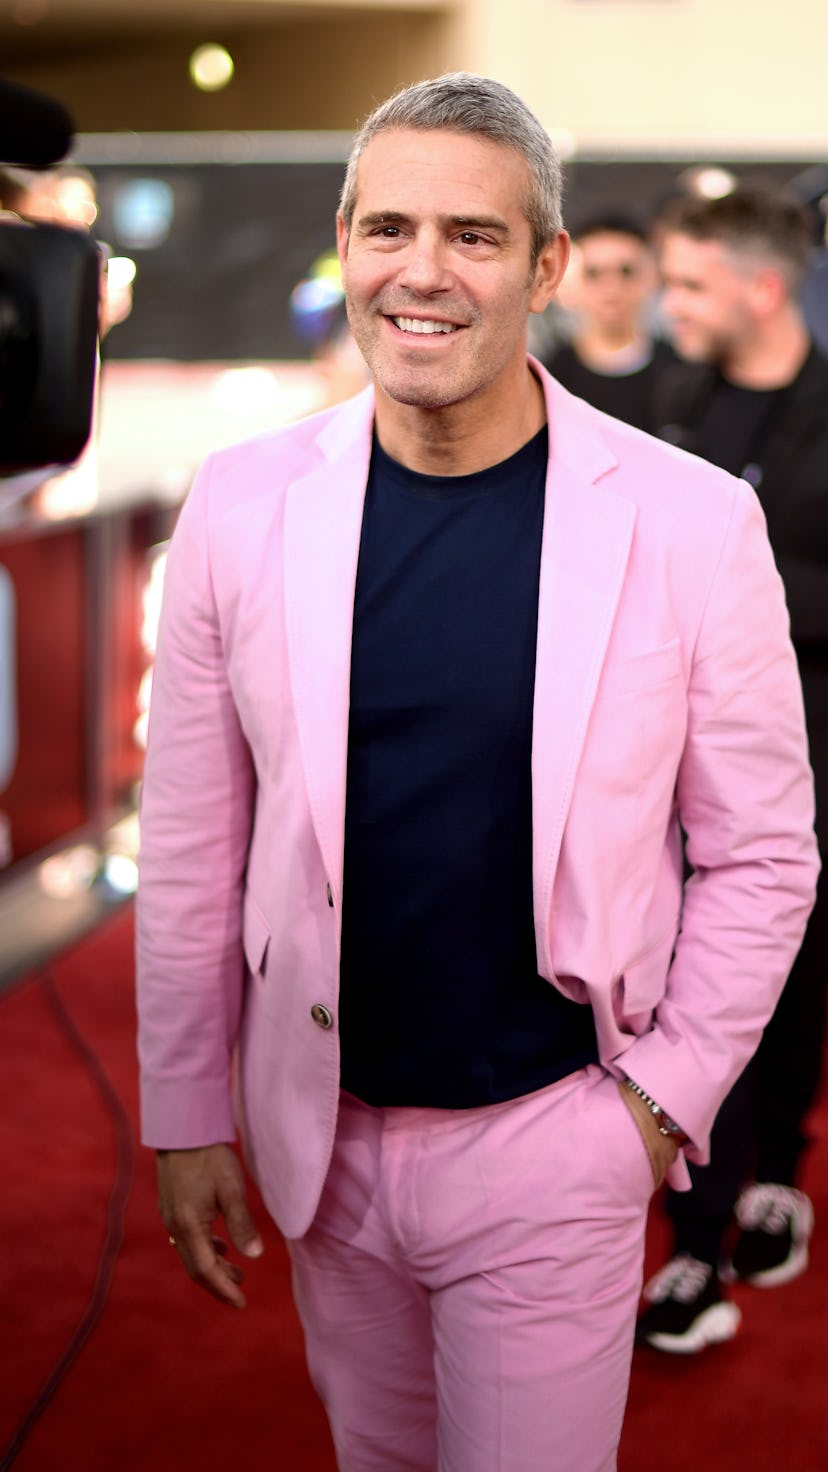 LAS VEGAS, NV - MAY 20:  TV personality-producer Andy Cohen attends the 2018 Billboard Music Awards ...